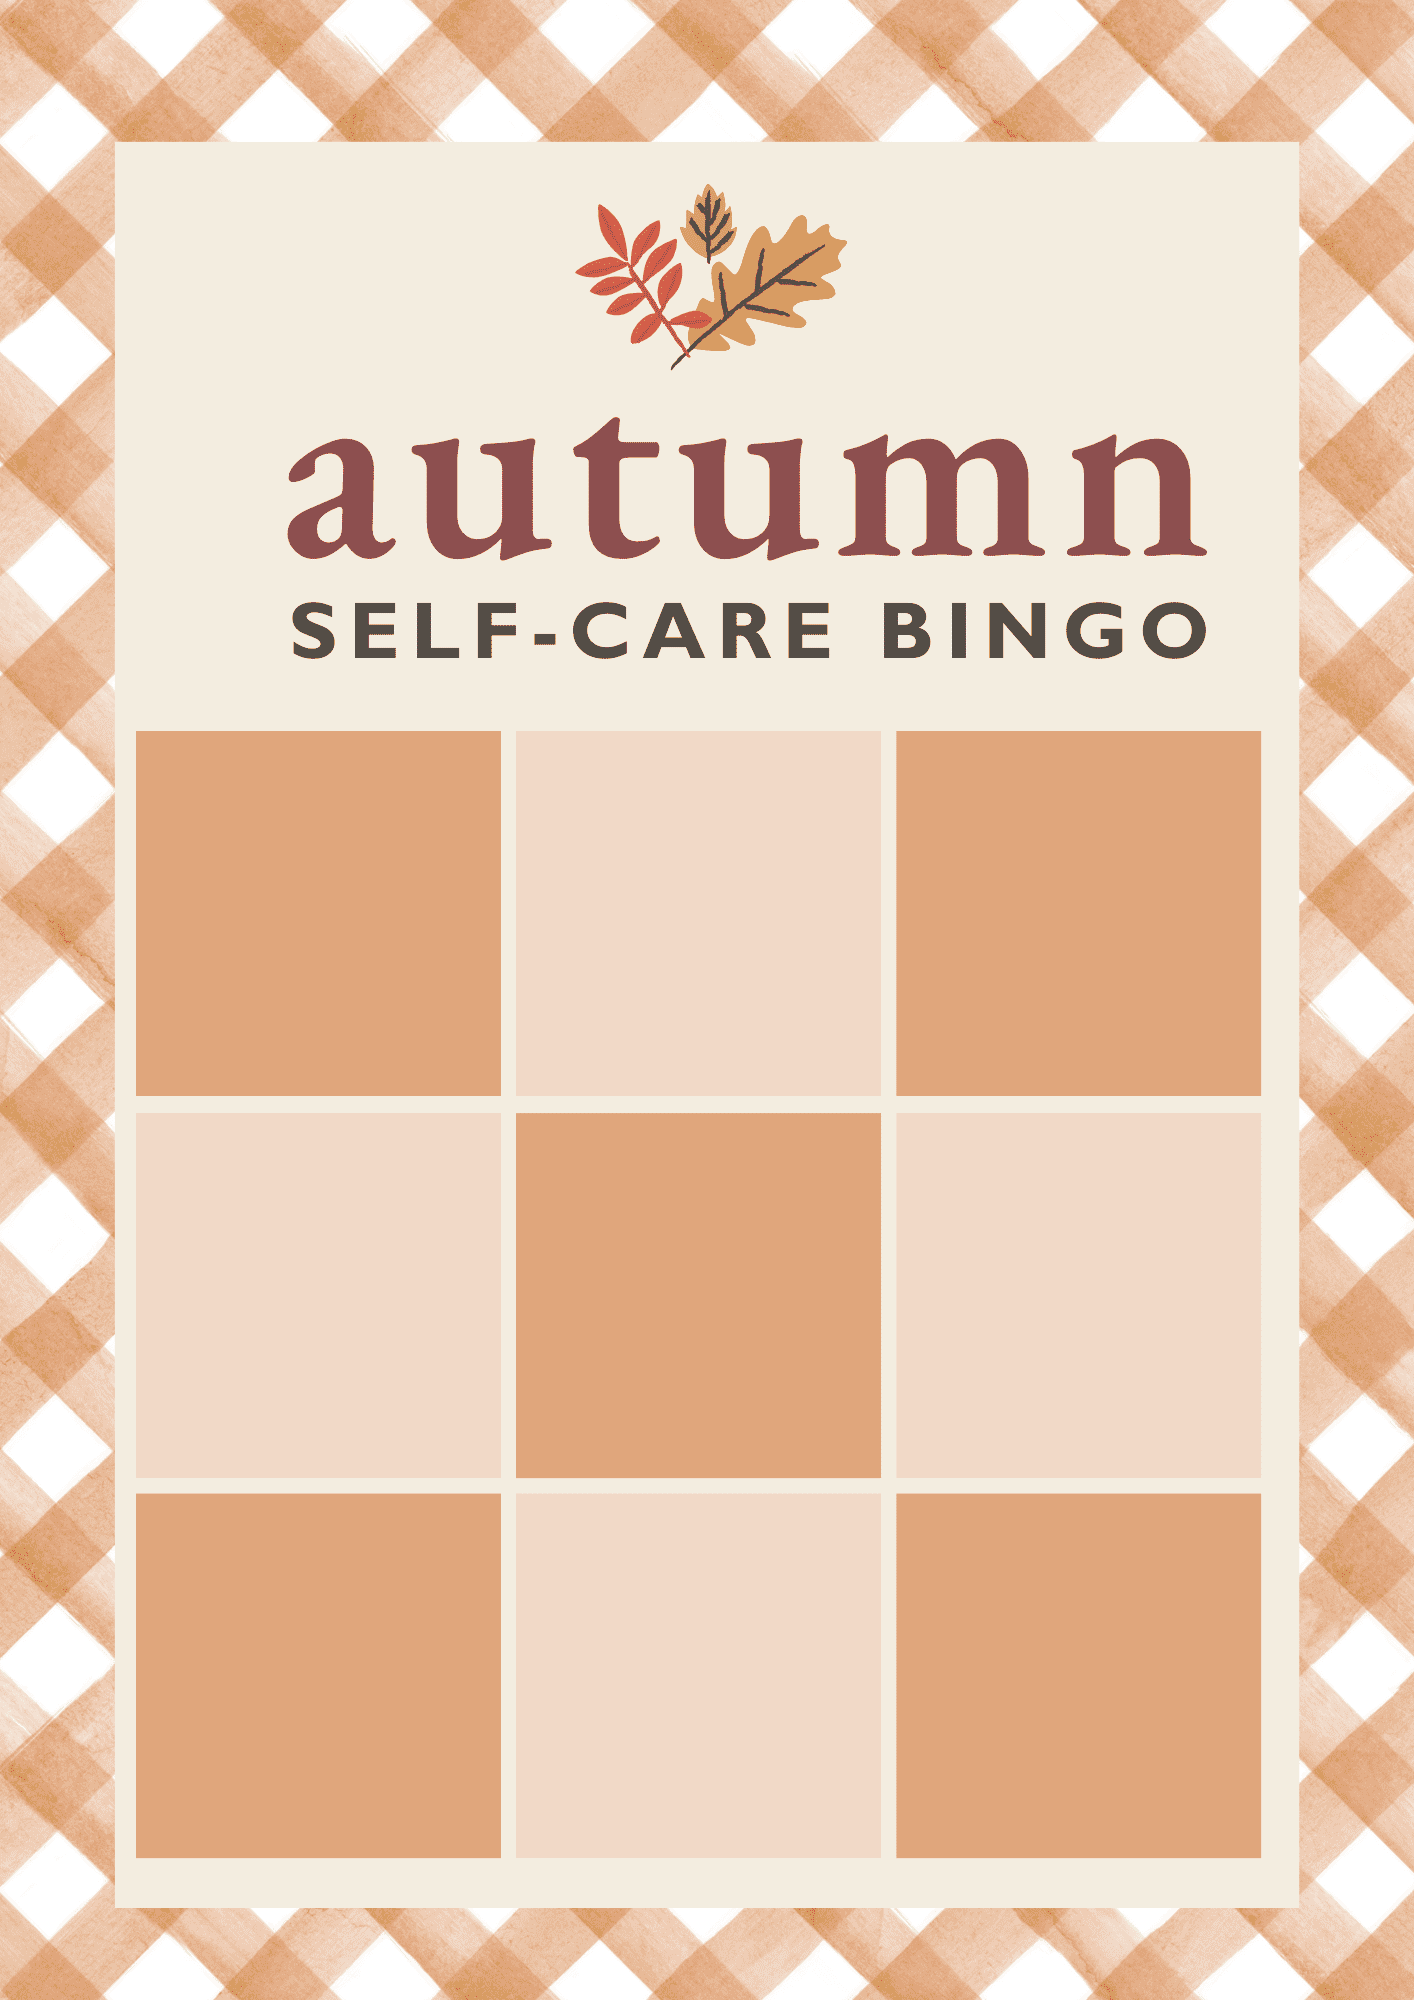 autumn self care bingo template for social media and instagram stories